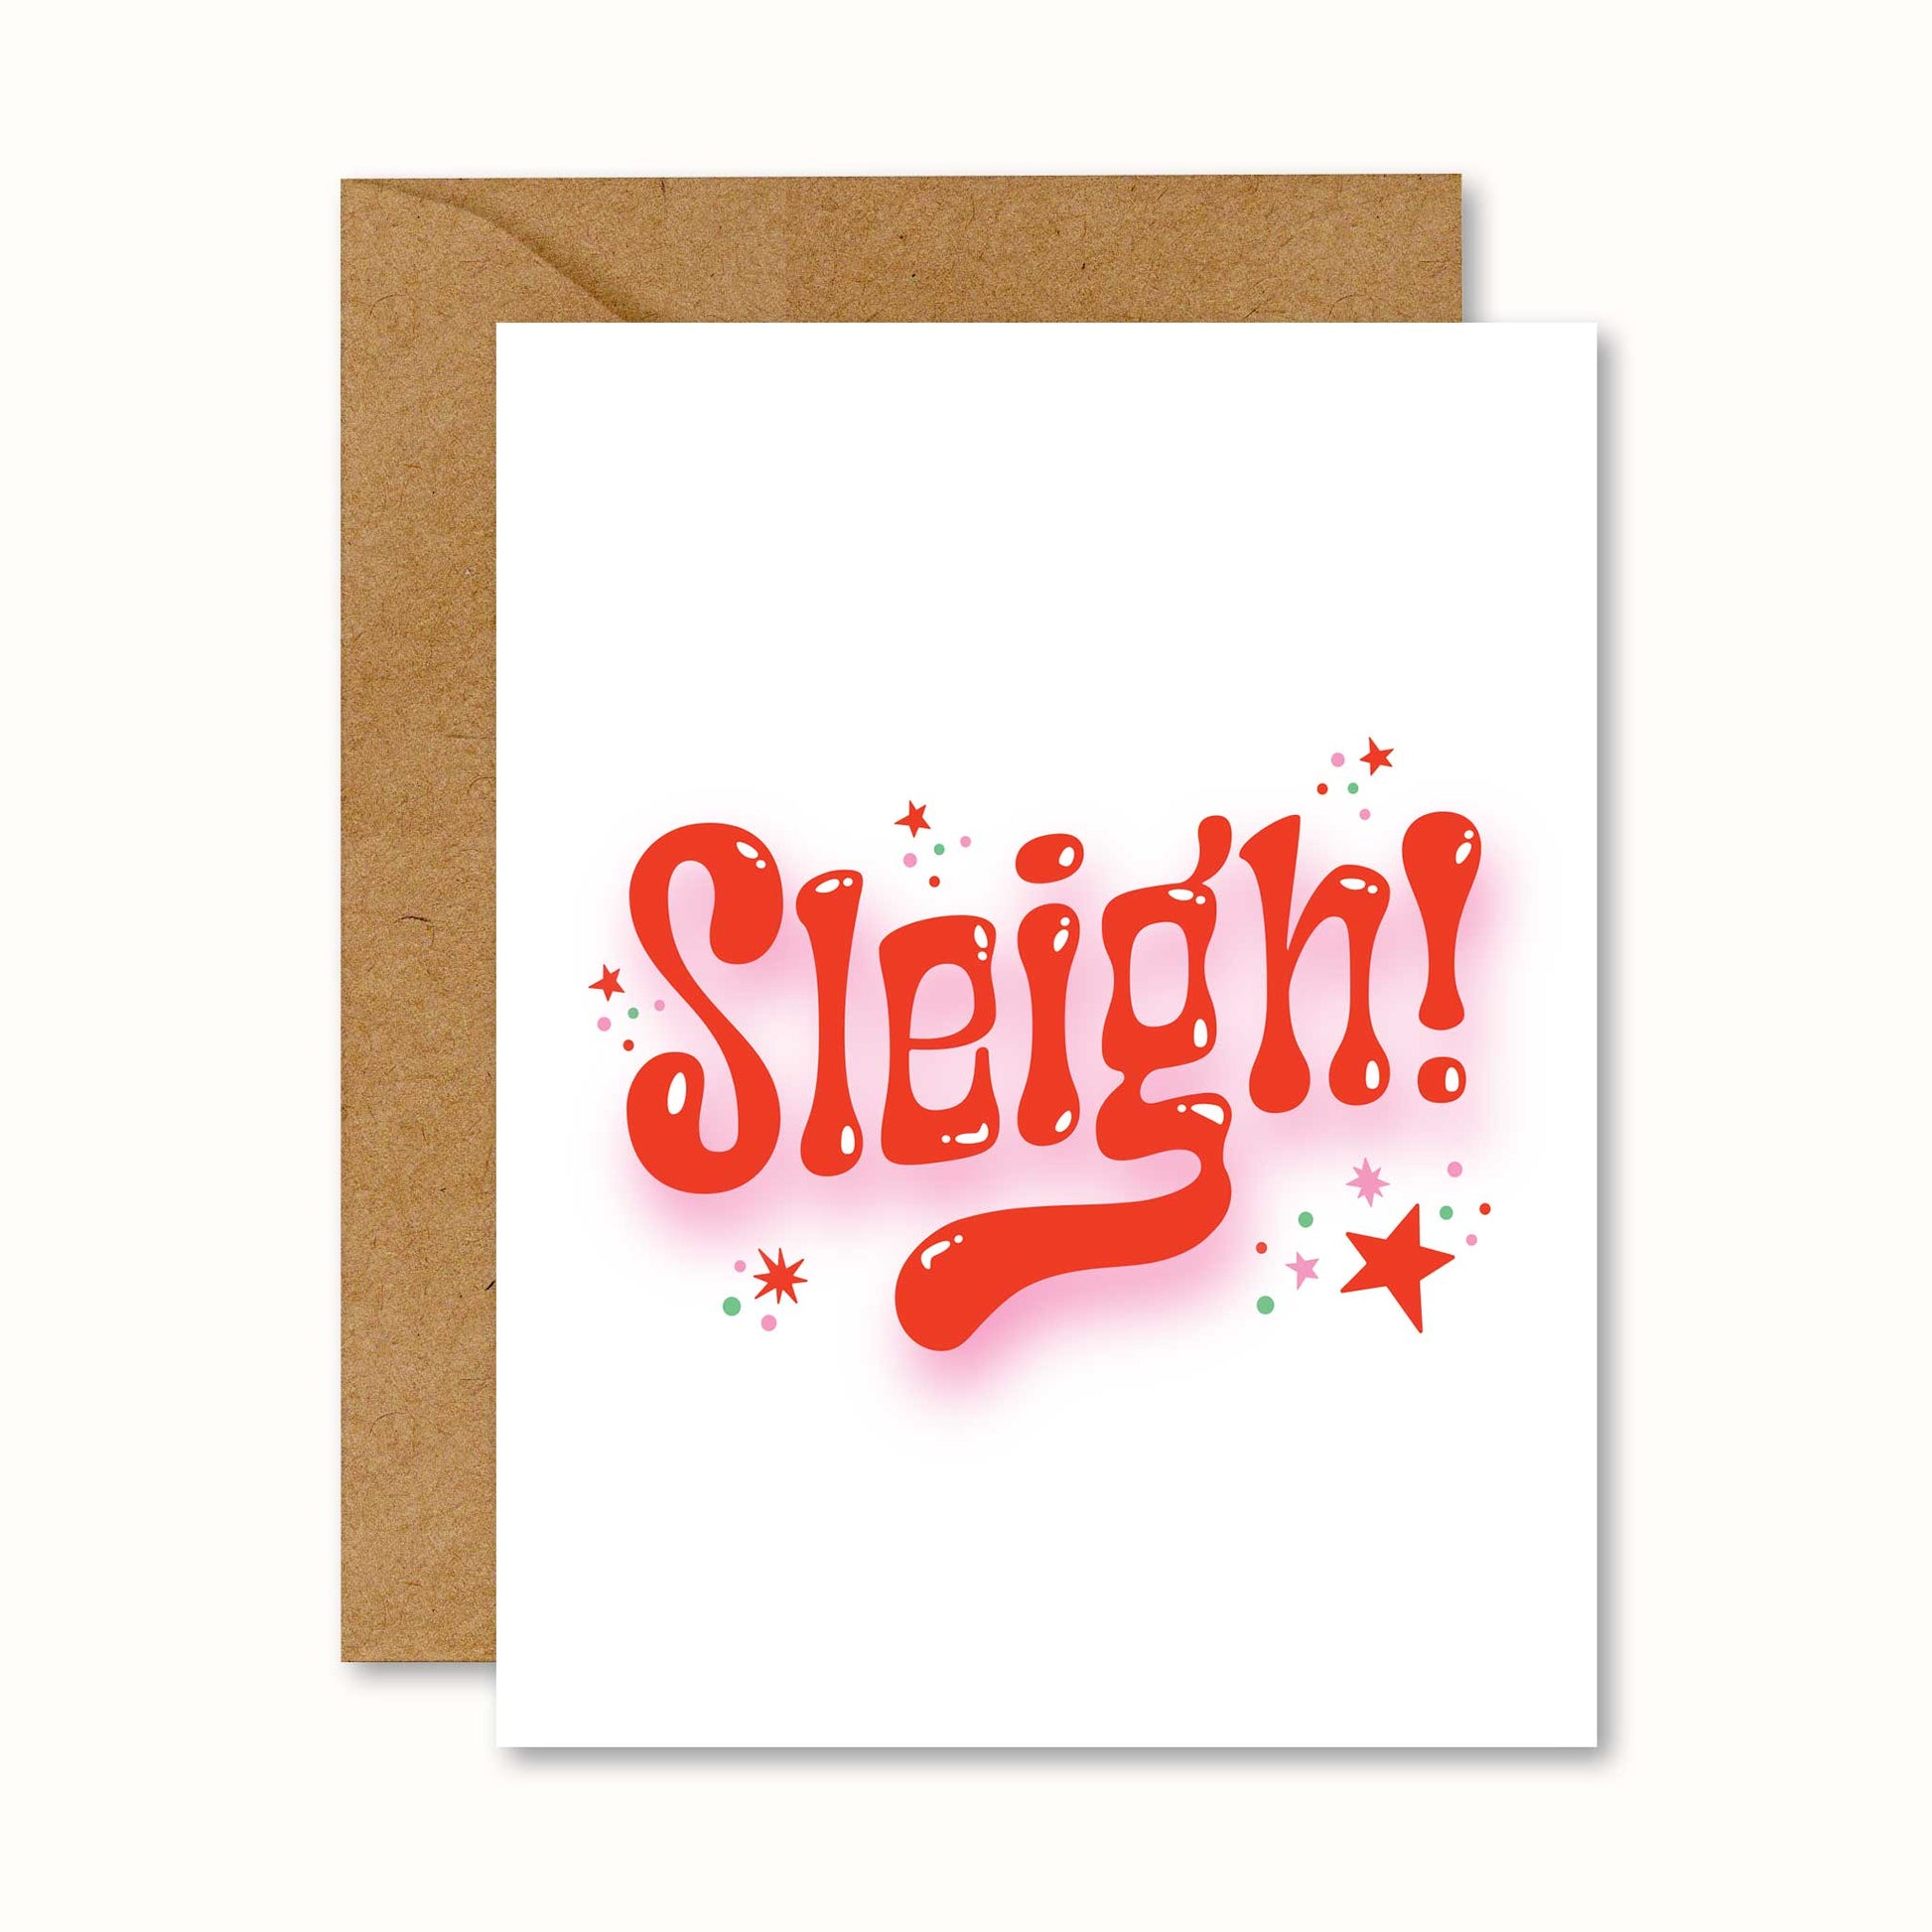 christmas greeting card graphic reads "Sleigh!" in funky text with sparkles and stars